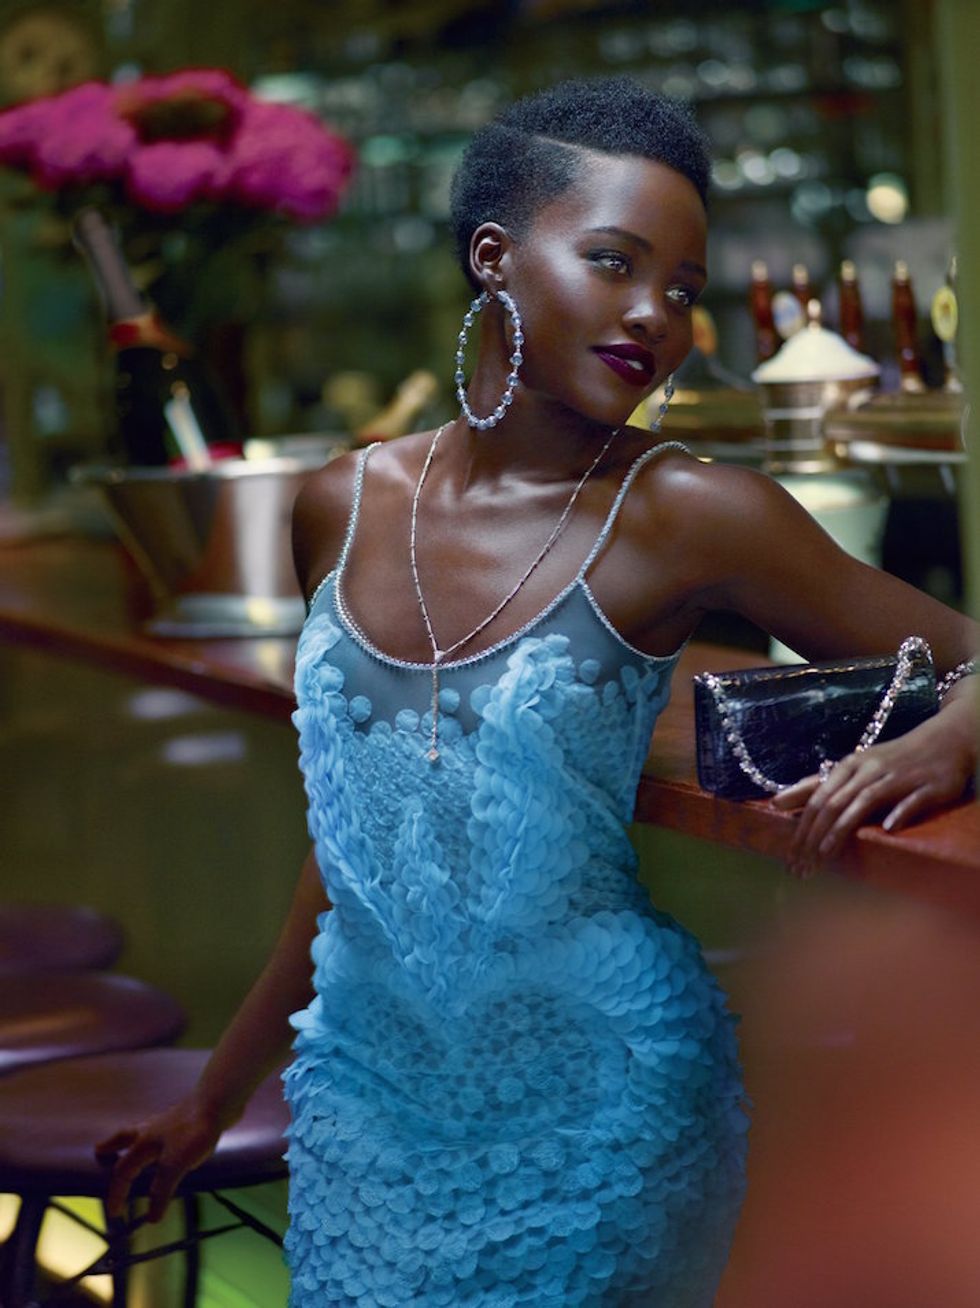 Lupita Nyong'o's Second Vogue Cover And Flawless Couture Spread Take The Internet By Storm